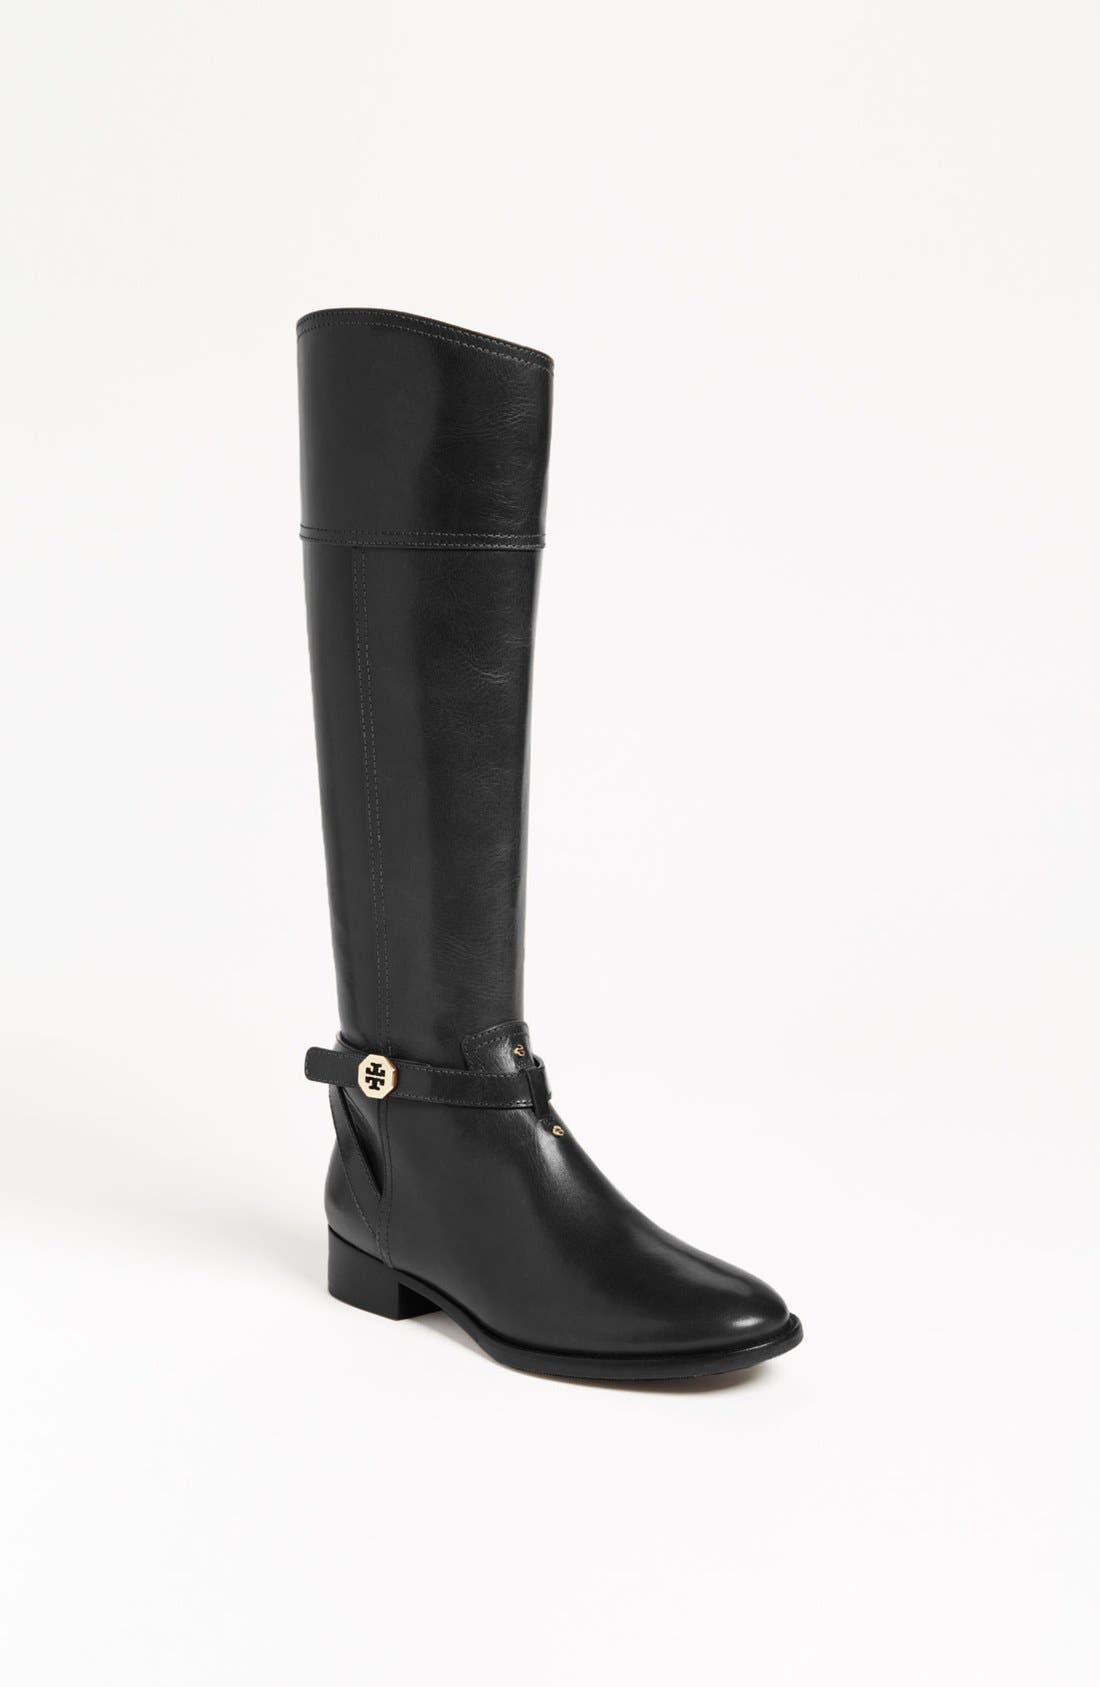 tory burch riding boots nordstrom